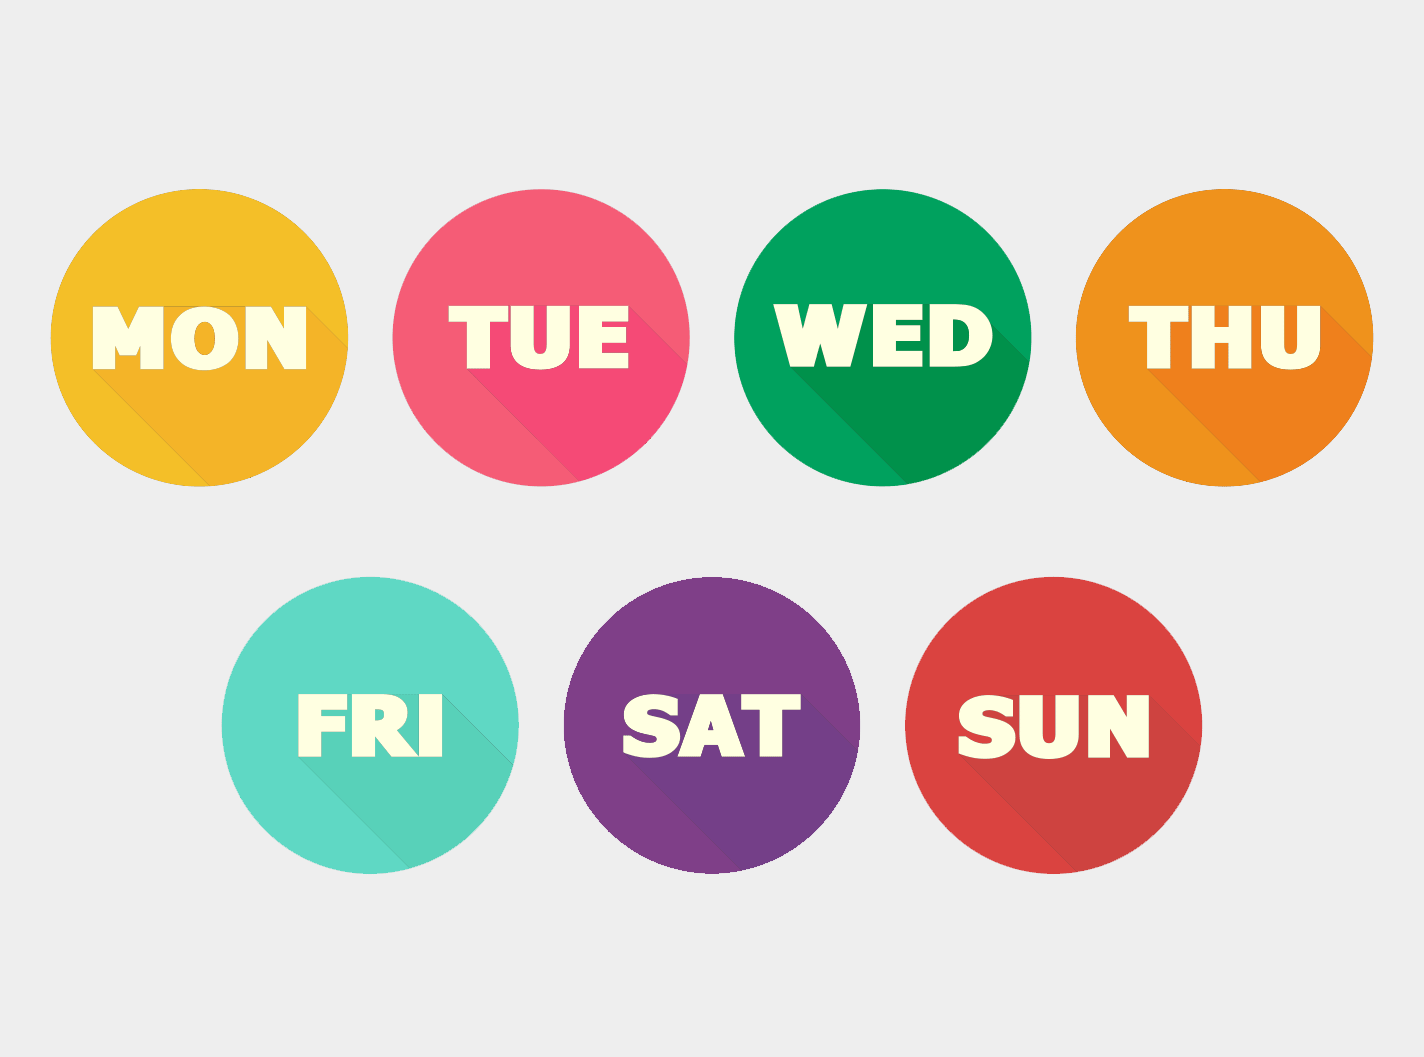 Days of the Week in Dutch